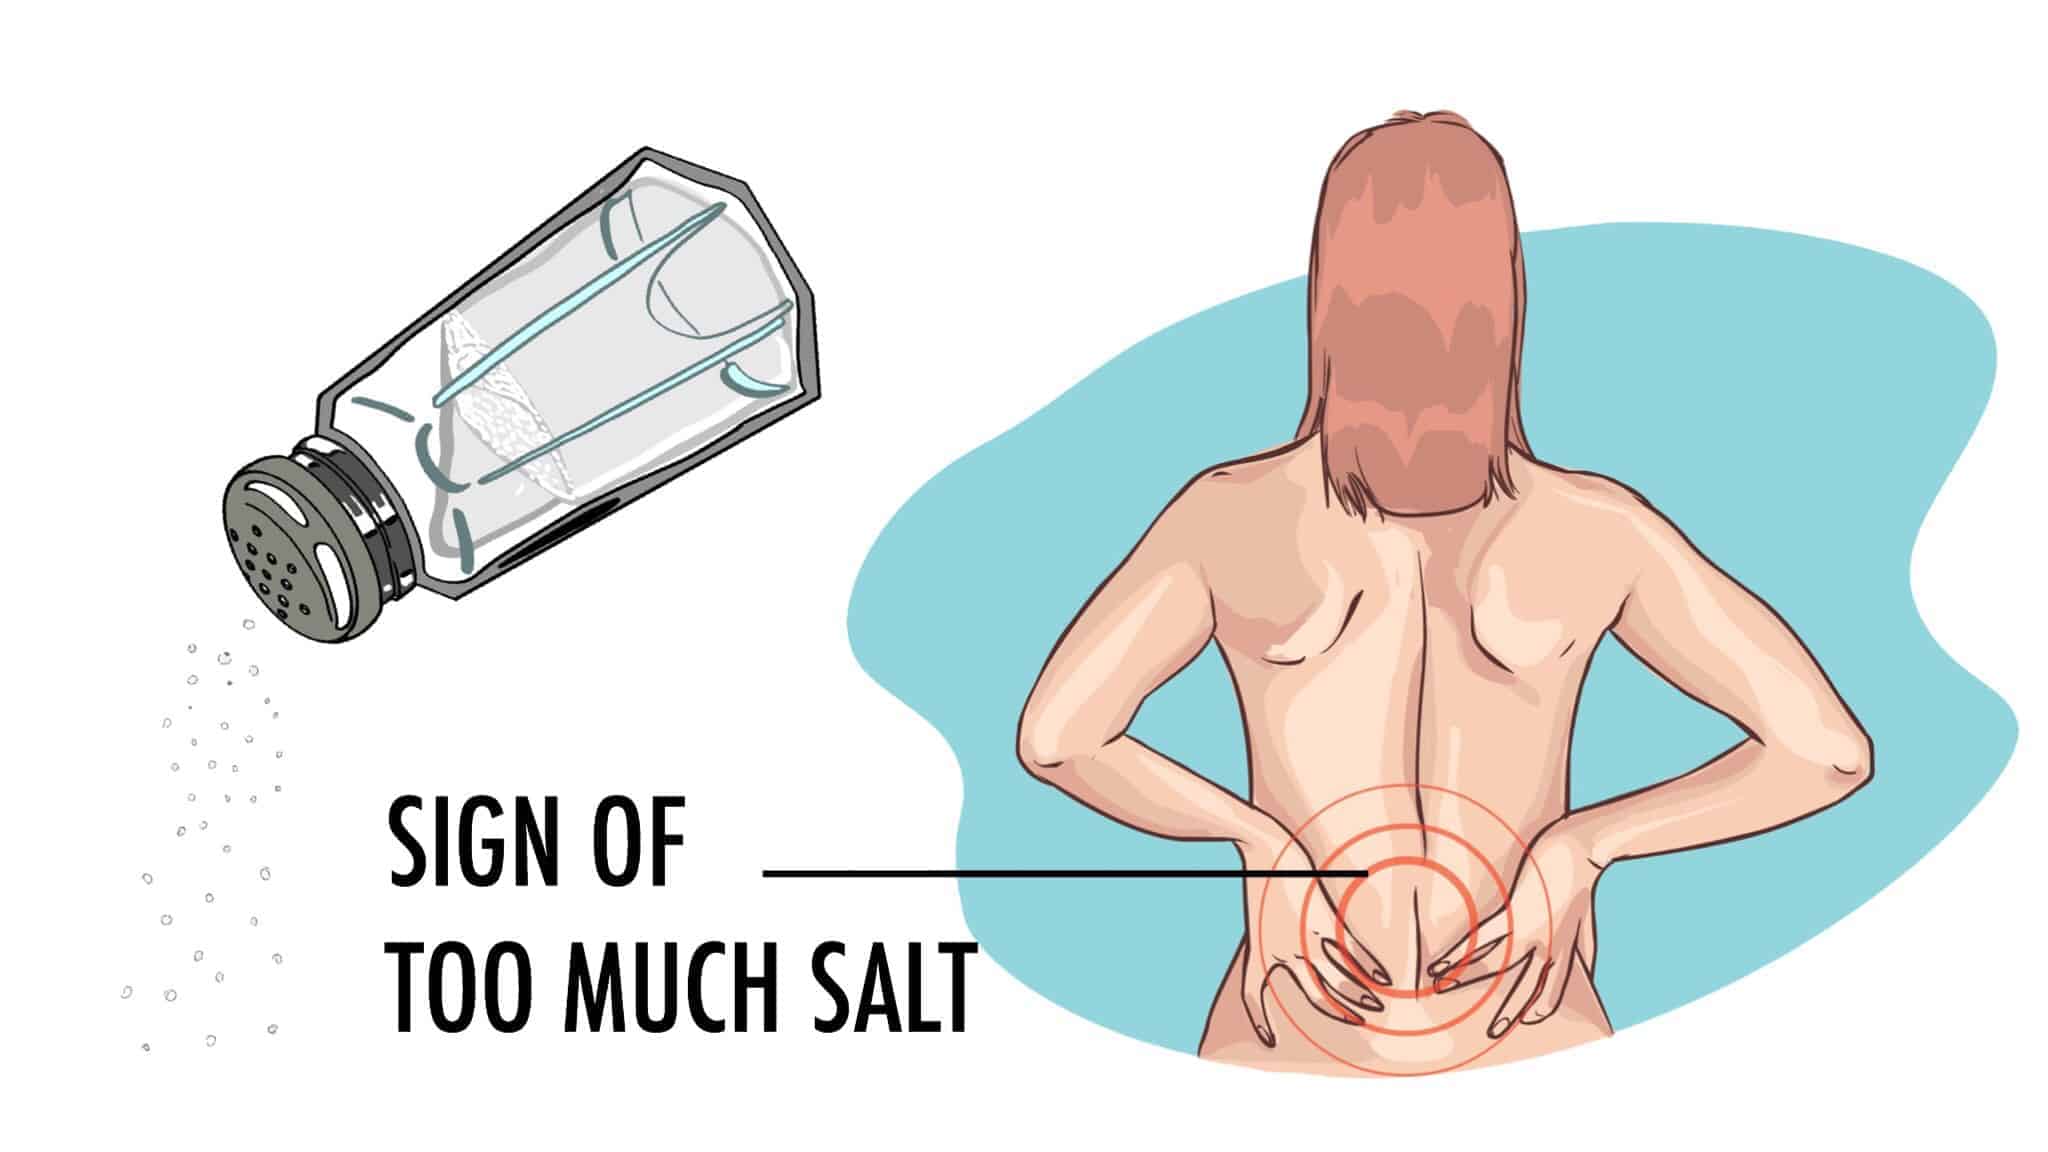 Scientists Explain 5 Things That Happen To Your Body When You Eat Too Much Salt